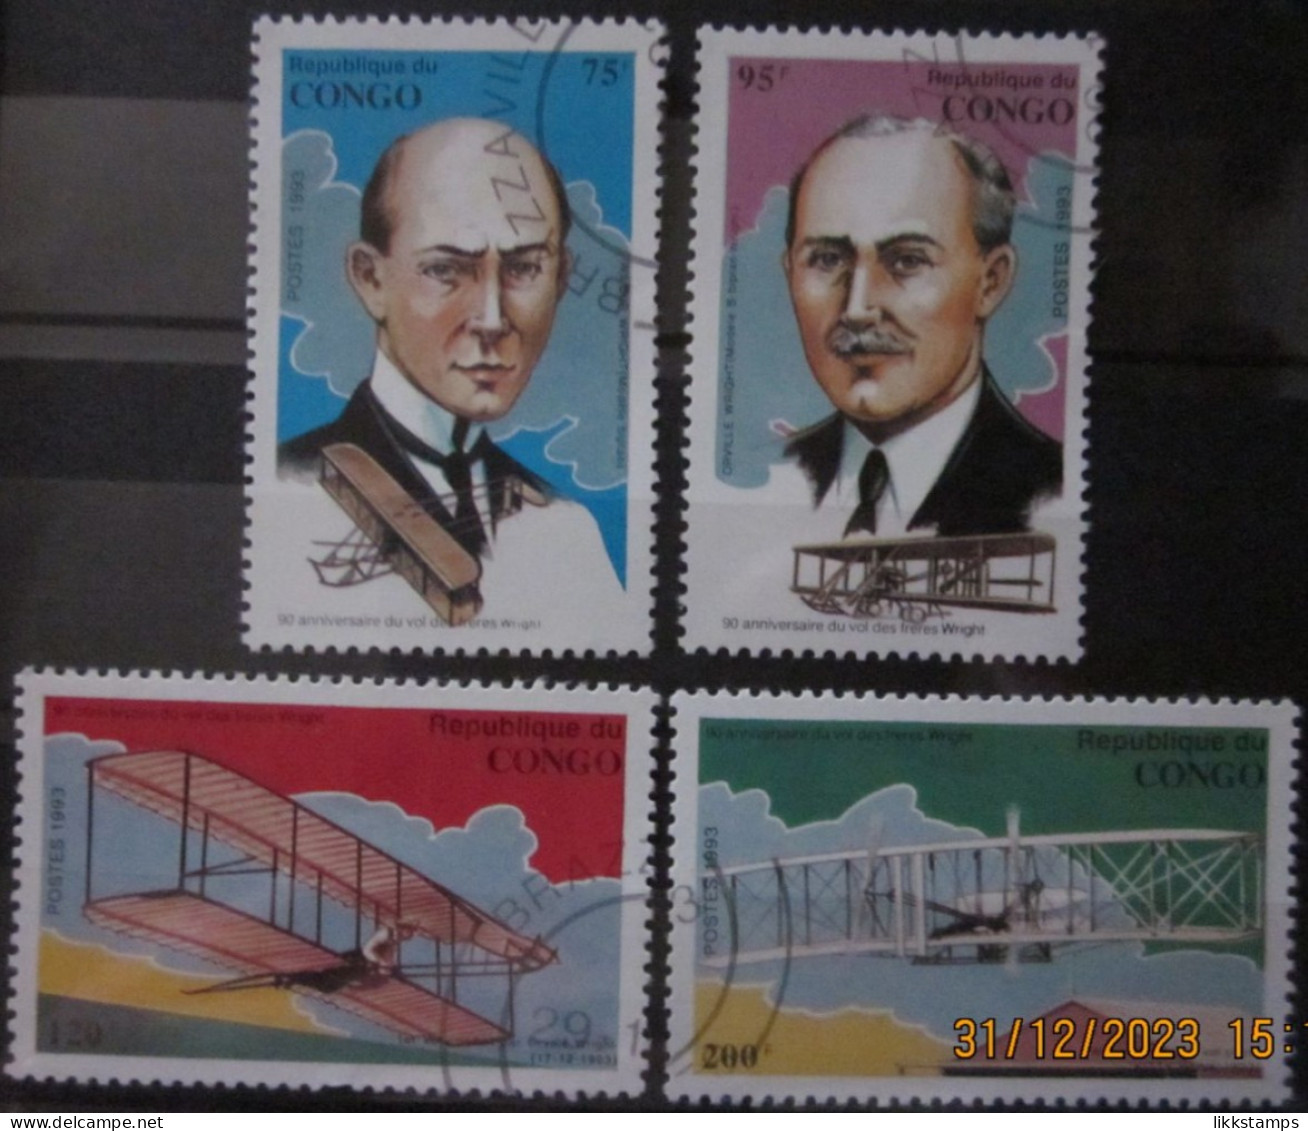 CONGO 17/12/1993 ~ THE 90th ANNIVERSARY OF THE FIRST POWERED FLIGHT. ~  VFU #03087 - Oblitérés